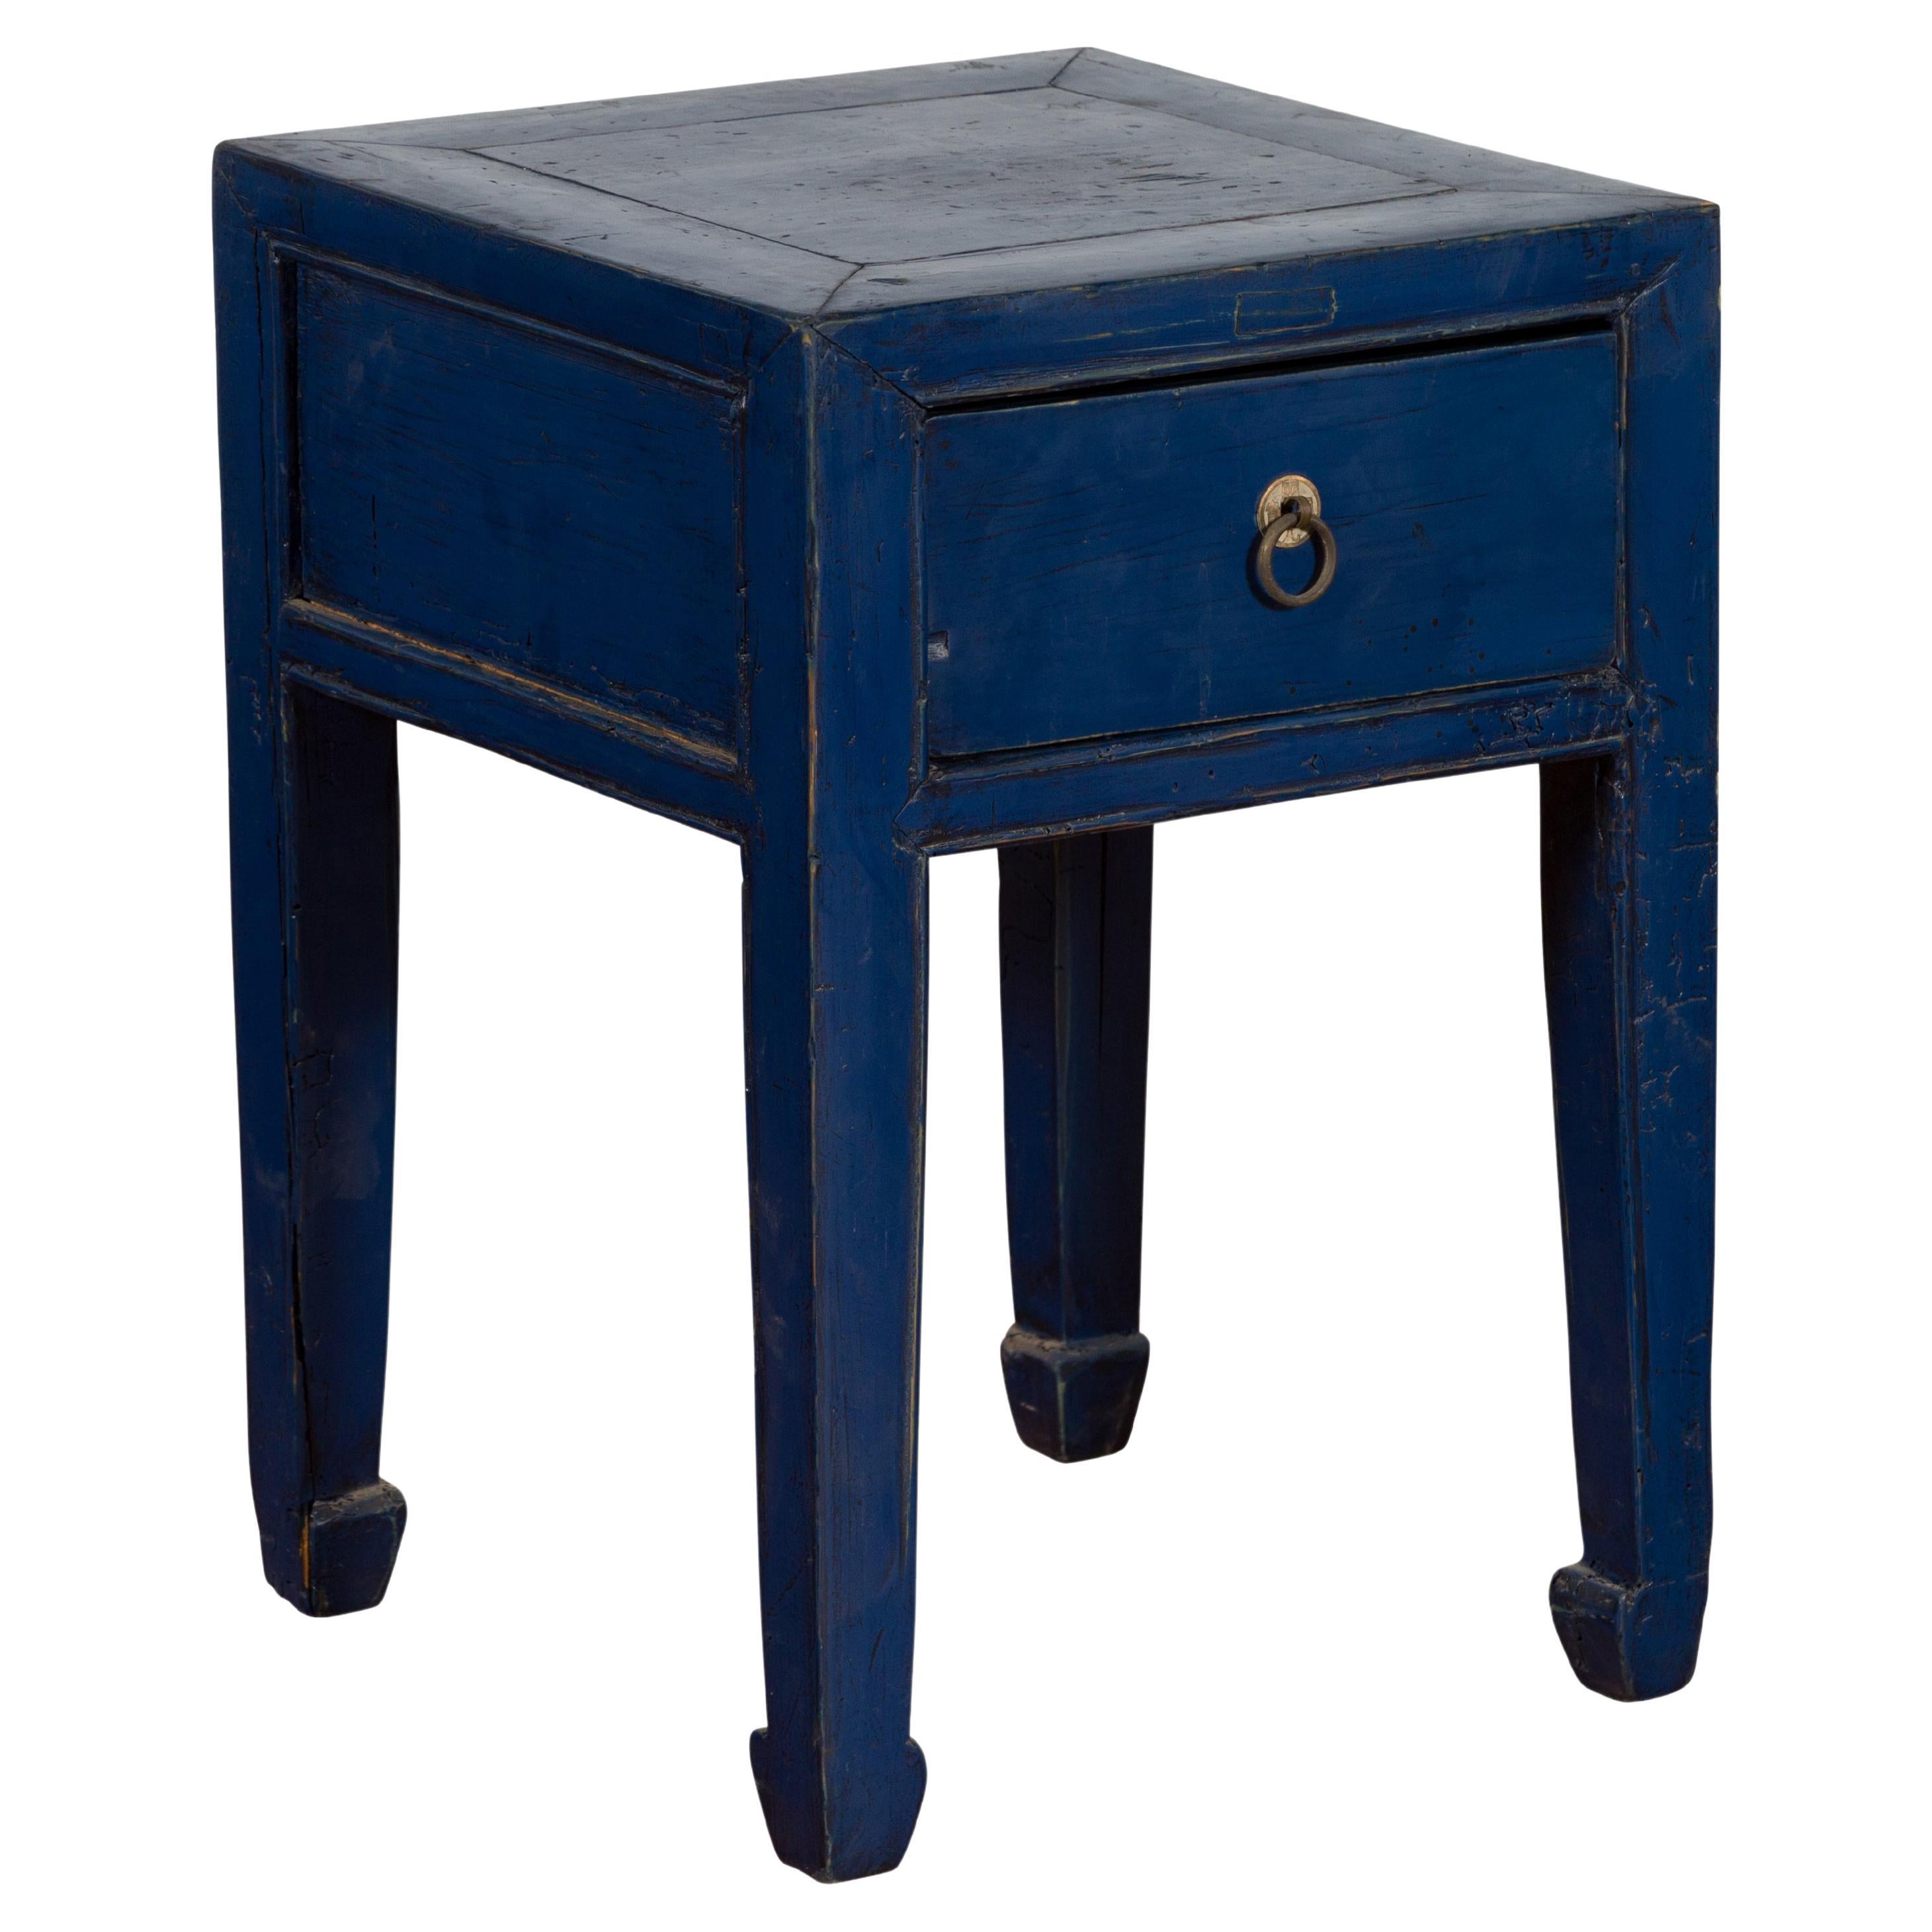 Chinese Ming Dynasty Style Single Drawer Blue Lacquer Table with Horse Hoof Legs